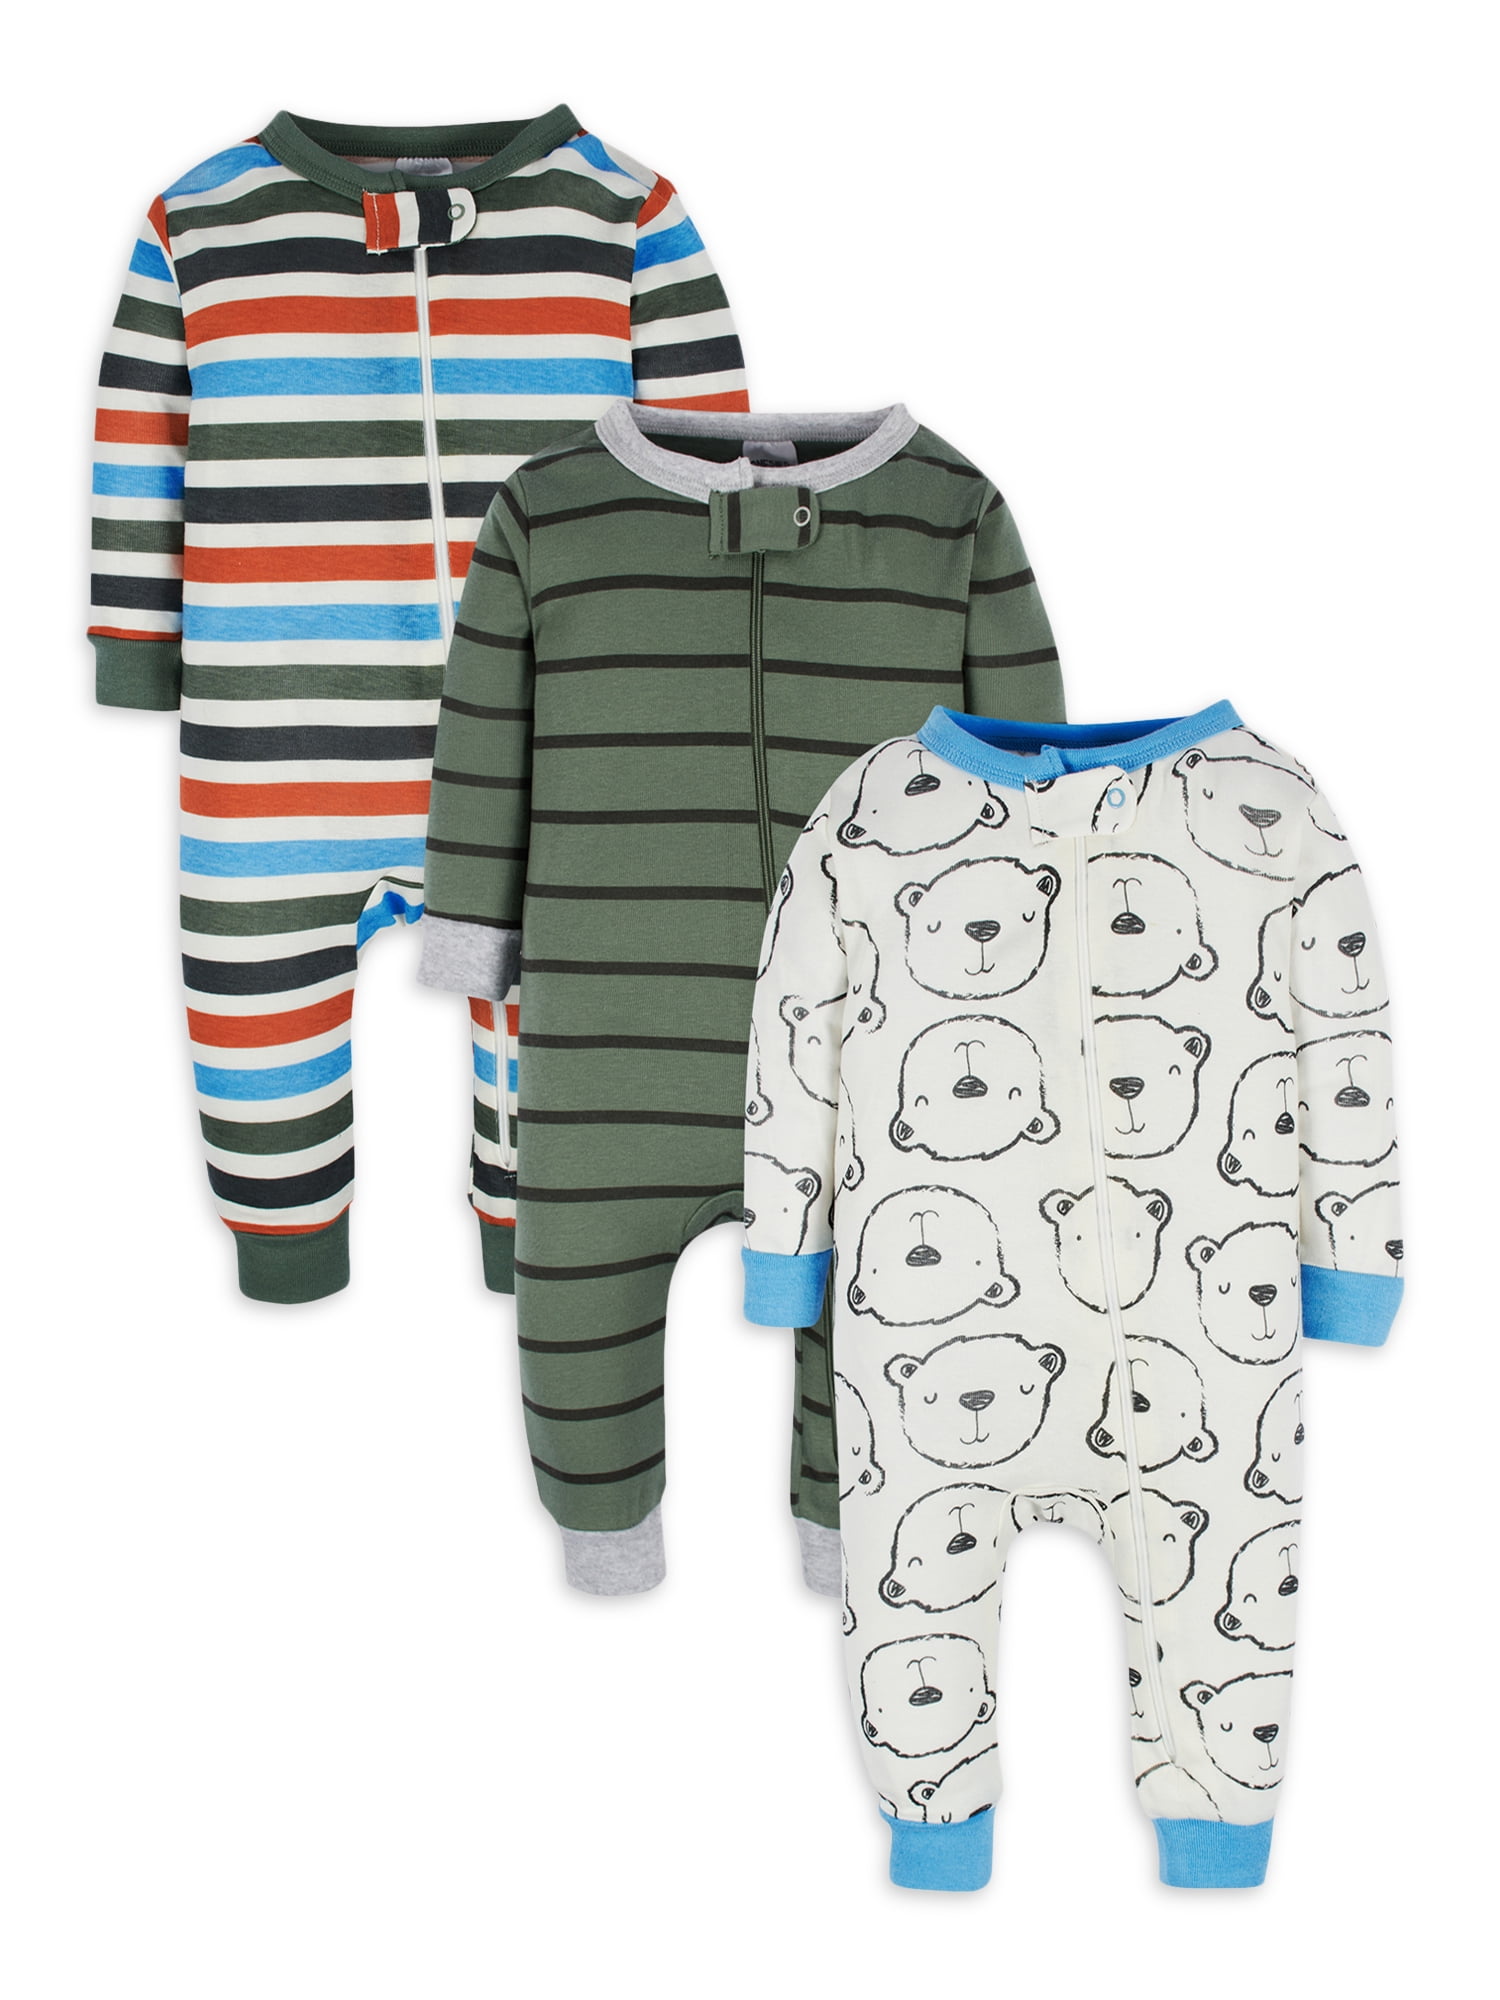 Onesies Brand Baby & Toddler Boy Snug Fit Footless Cotton Pajamas, 3-Pack  (0/3 Months - 5T) 